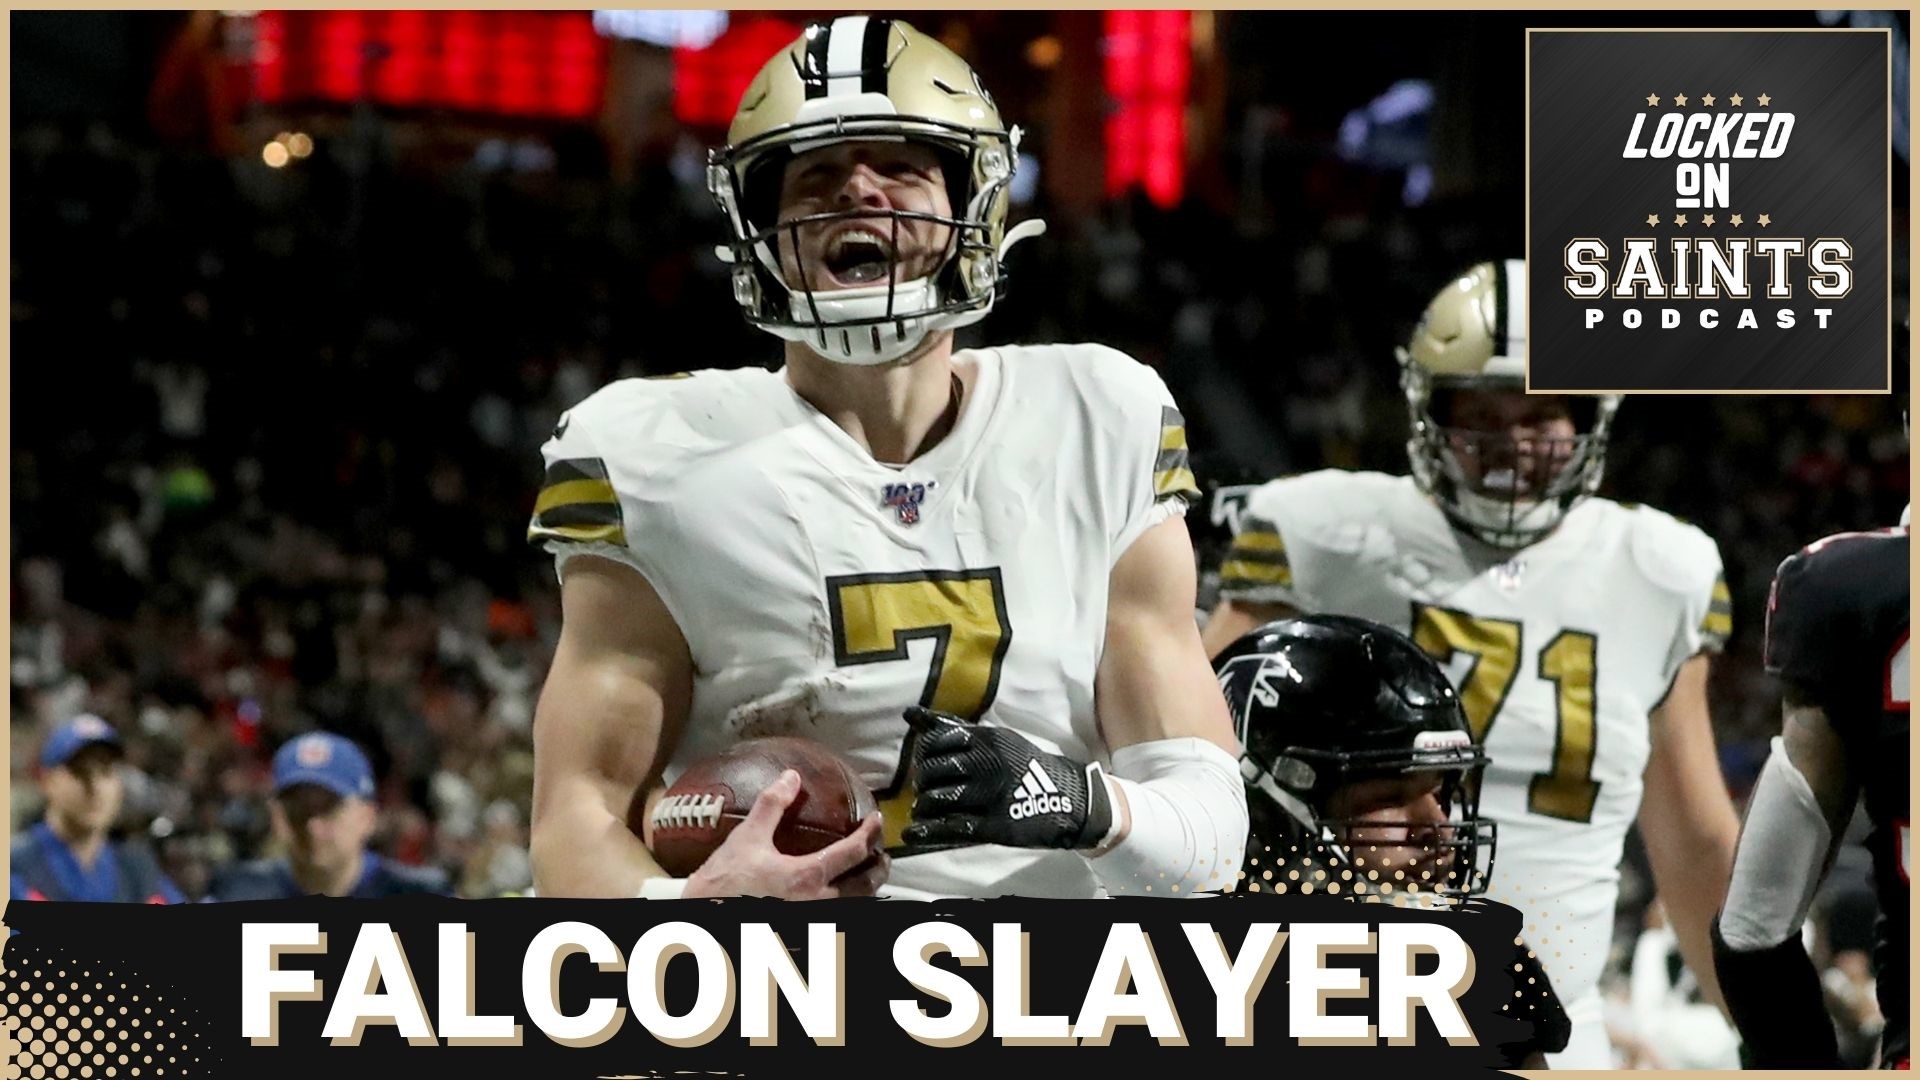 The news may be around the New Orleans Saints facing Atlanta Falcons new starting QB Desmond Ridder, but Taysom Hill always steals the spotlight against ATL.